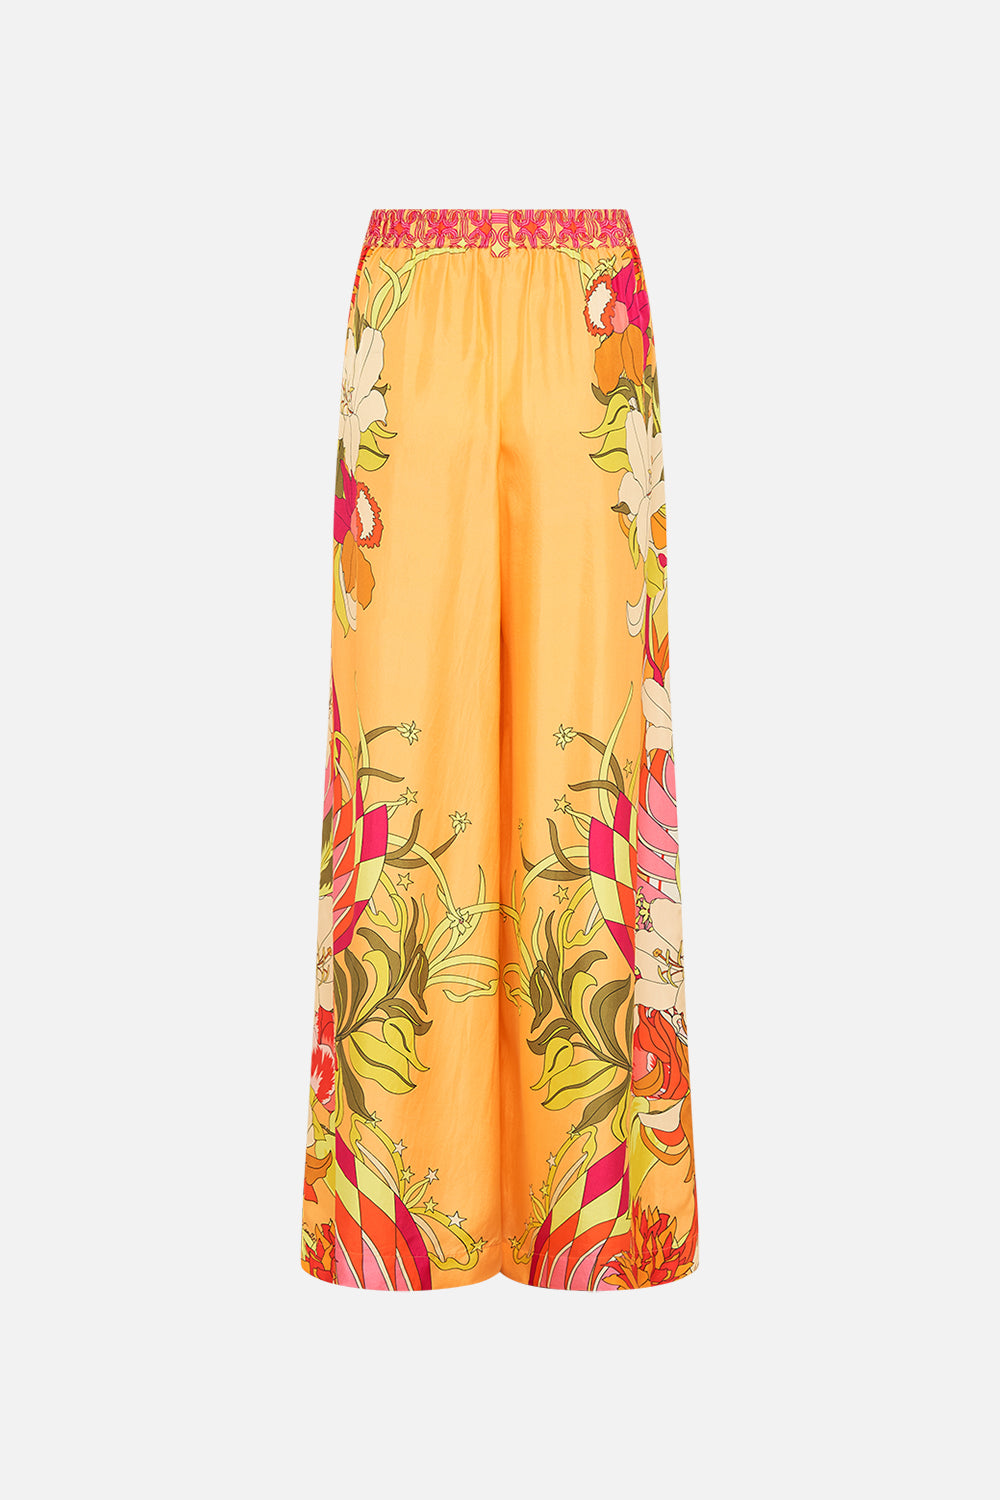 CAMILLA Floral Wide Leg Waisted Pant in The Flower Child Society print